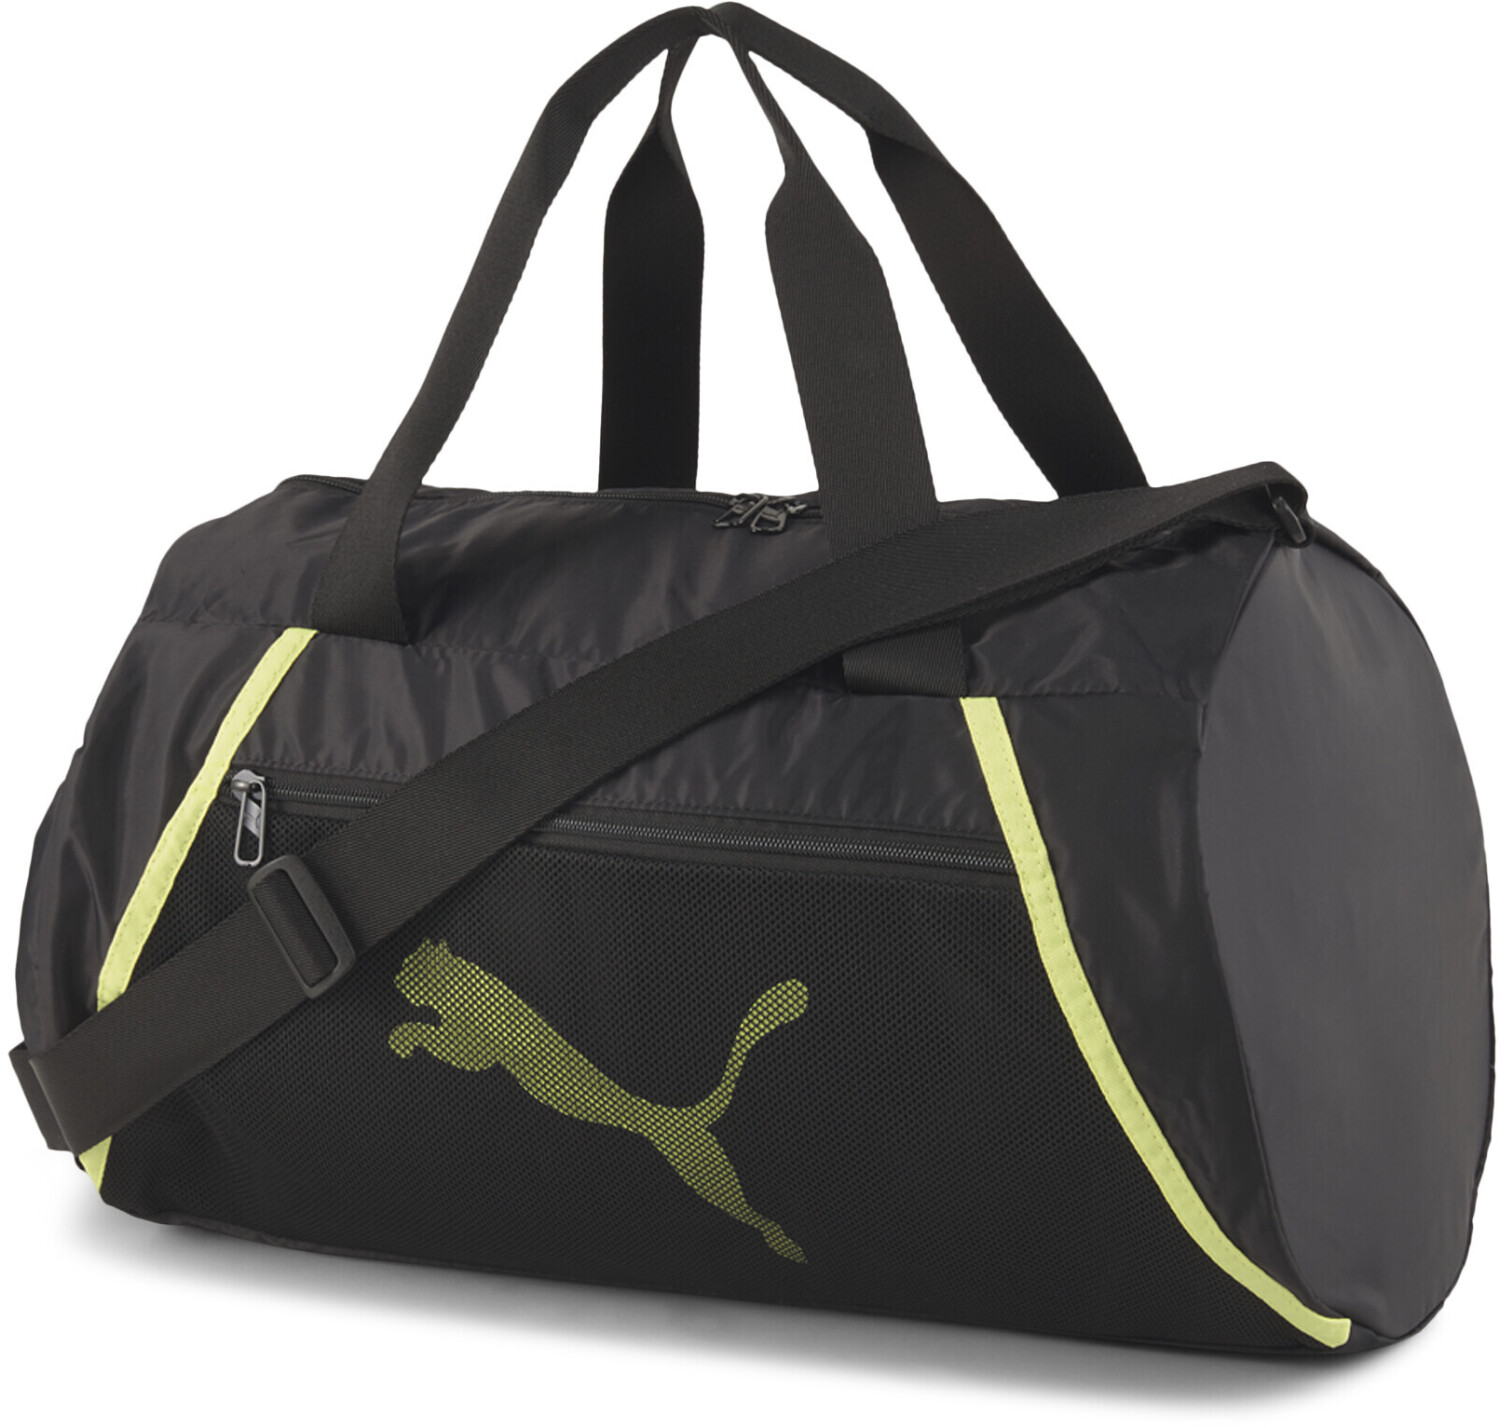 Buy Puma AT ESS Barrel Bag (077365-07) black-soft fluo yellow from £17. ...